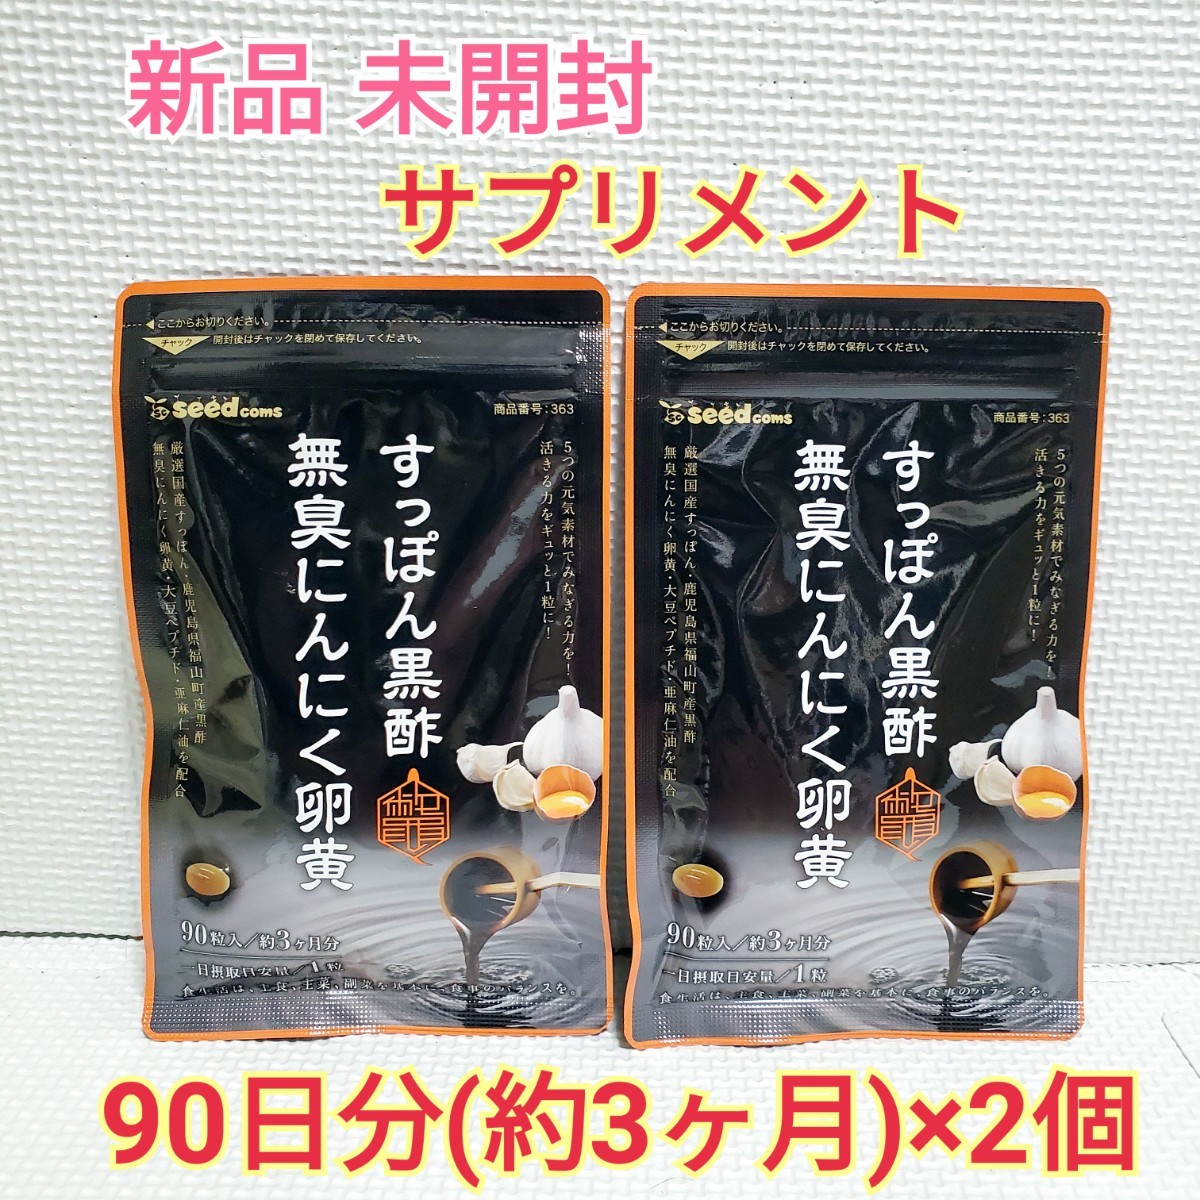  free shipping softshell turtle black vinegar less smell garlic egg yolk large legume pe small dosi-do Coms 6 months minute supplement diet support aging care support 